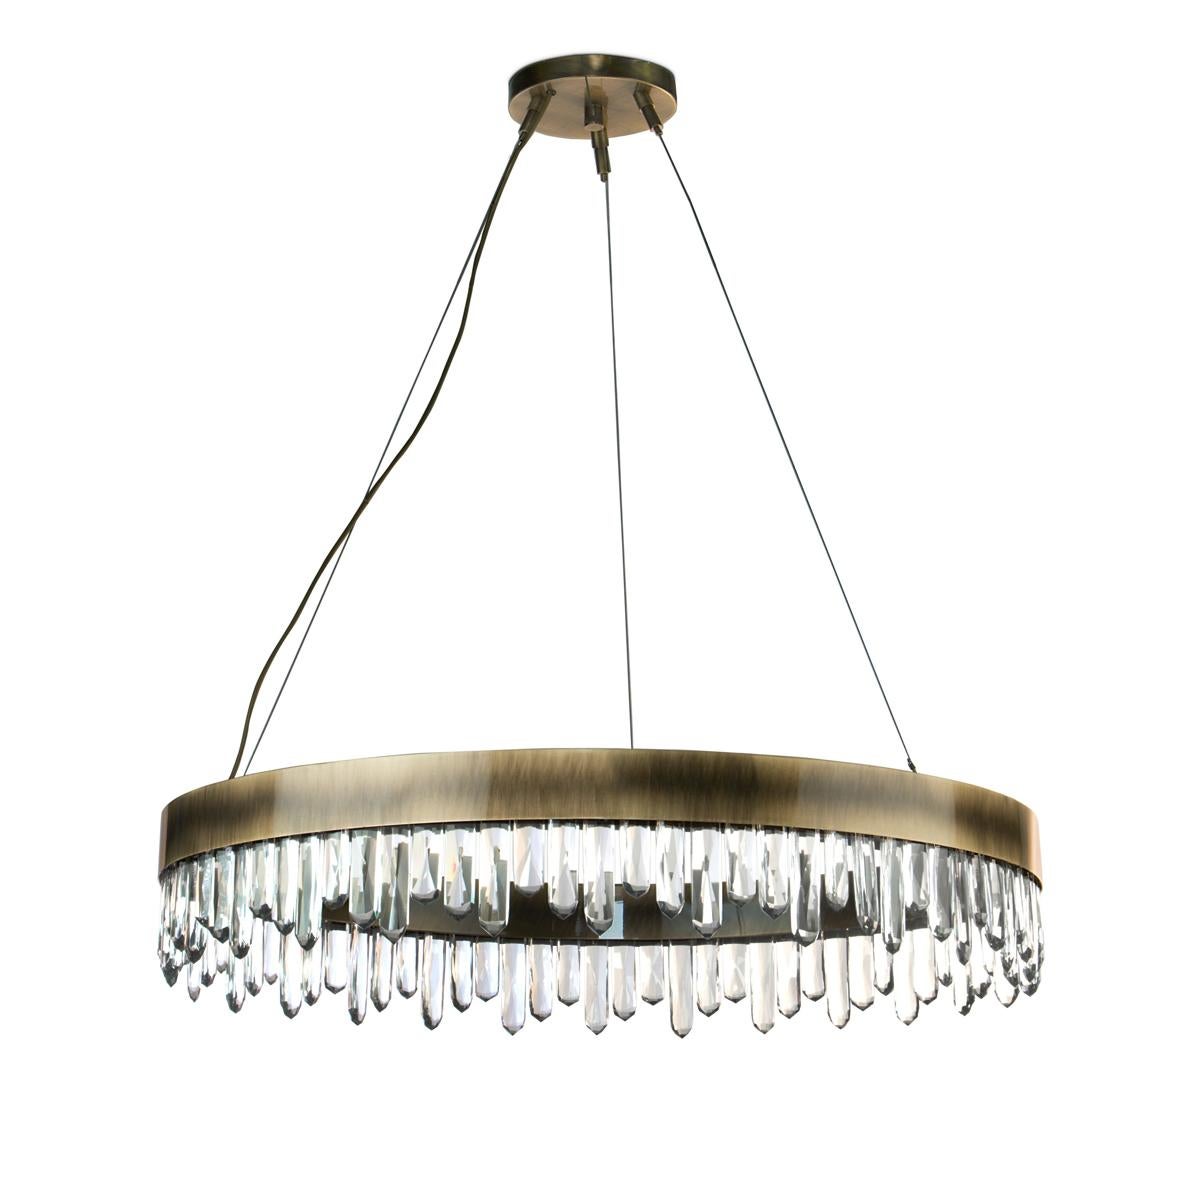 Chandelier crystal sticks with carved quartz crystal sticks.
Structure in solid brass in antique brushed finish.
With Led light included inside the ring structure.